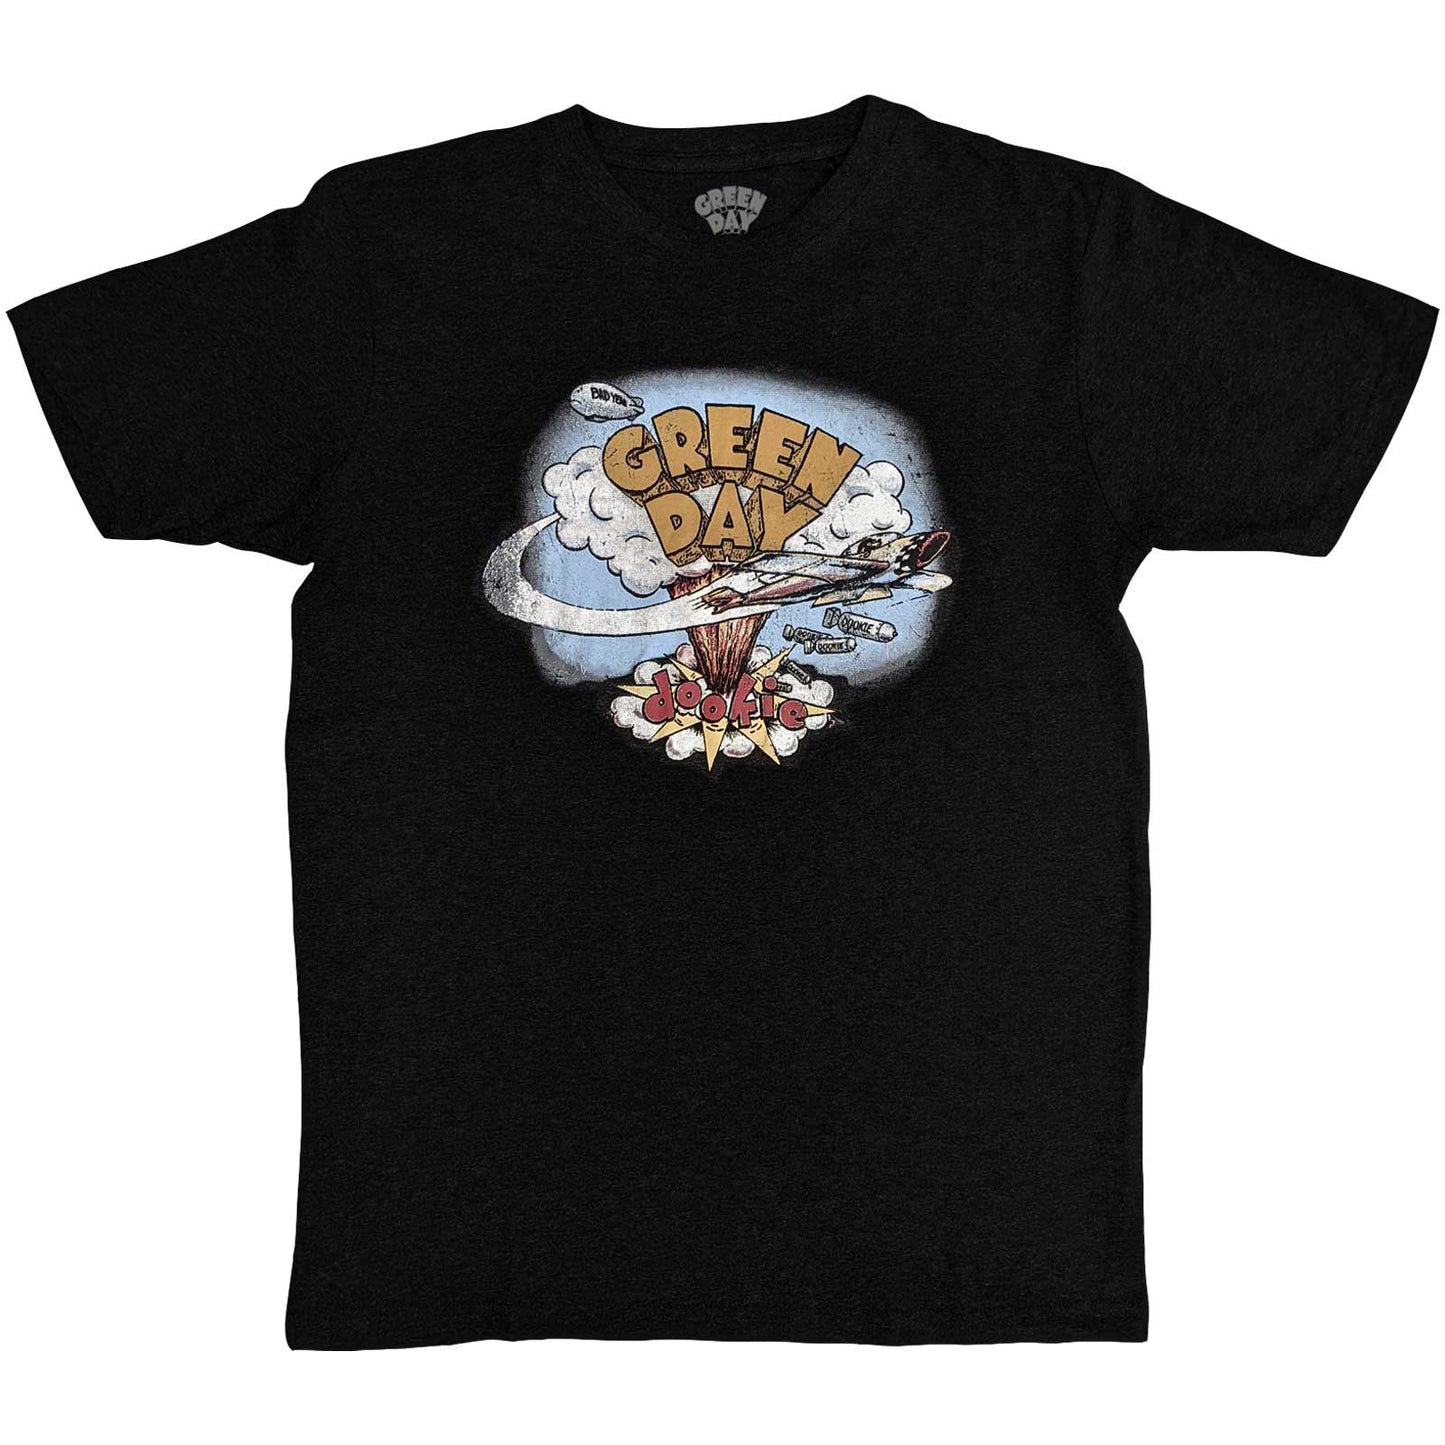 Green Day T-Shirt: Dookie Vintage